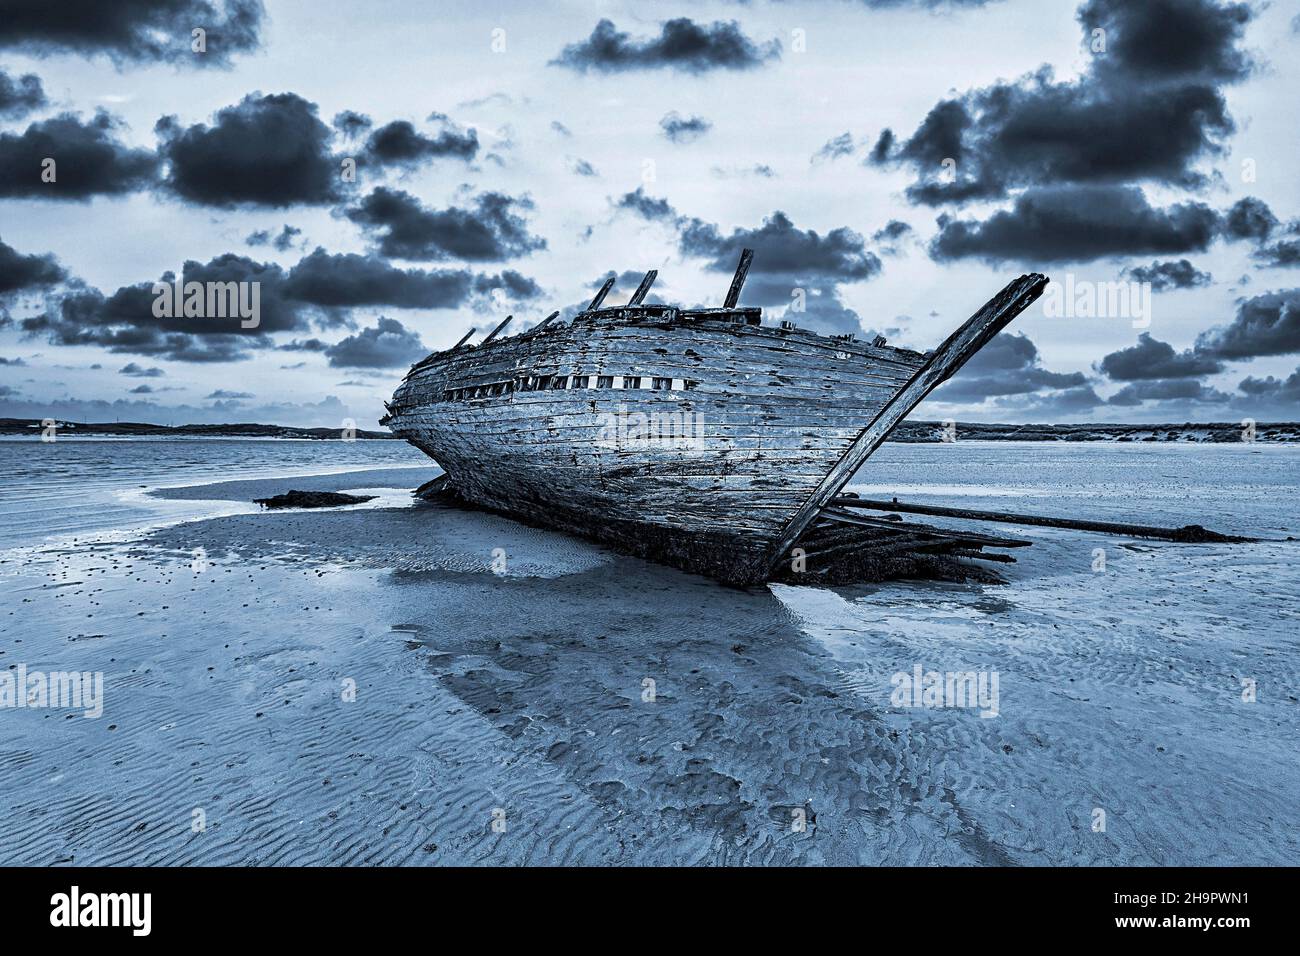 Wooden Shipwreck Bad Eddies Boat at Low Tide, Evening Sky, Bunbeg, Magheraclogher Beach, Gweedore, Donegal, Ireland Stock Photo